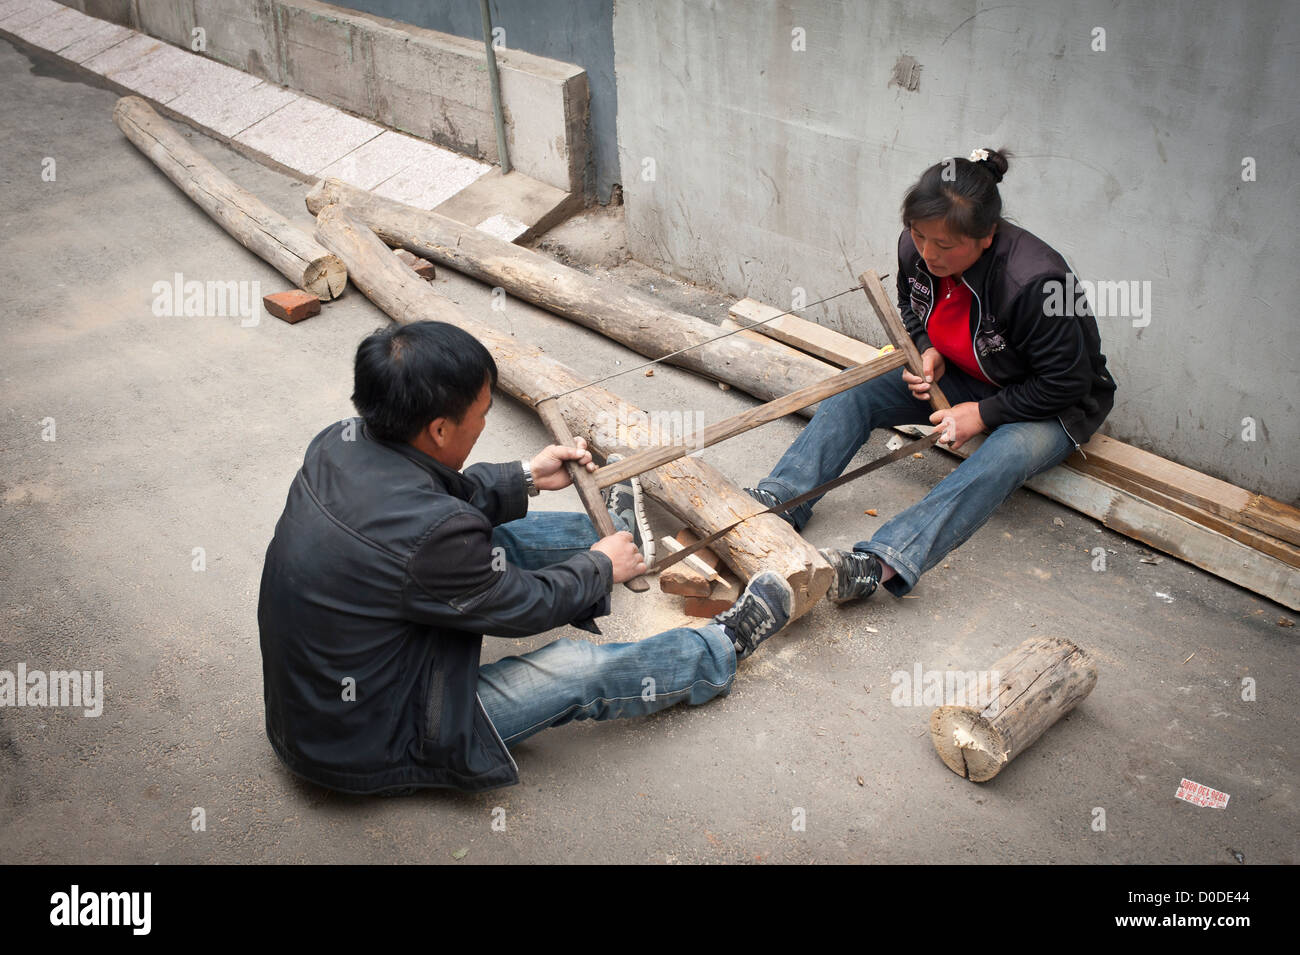 Chinese man and woman use a handsaw to cut a log Stock Photo